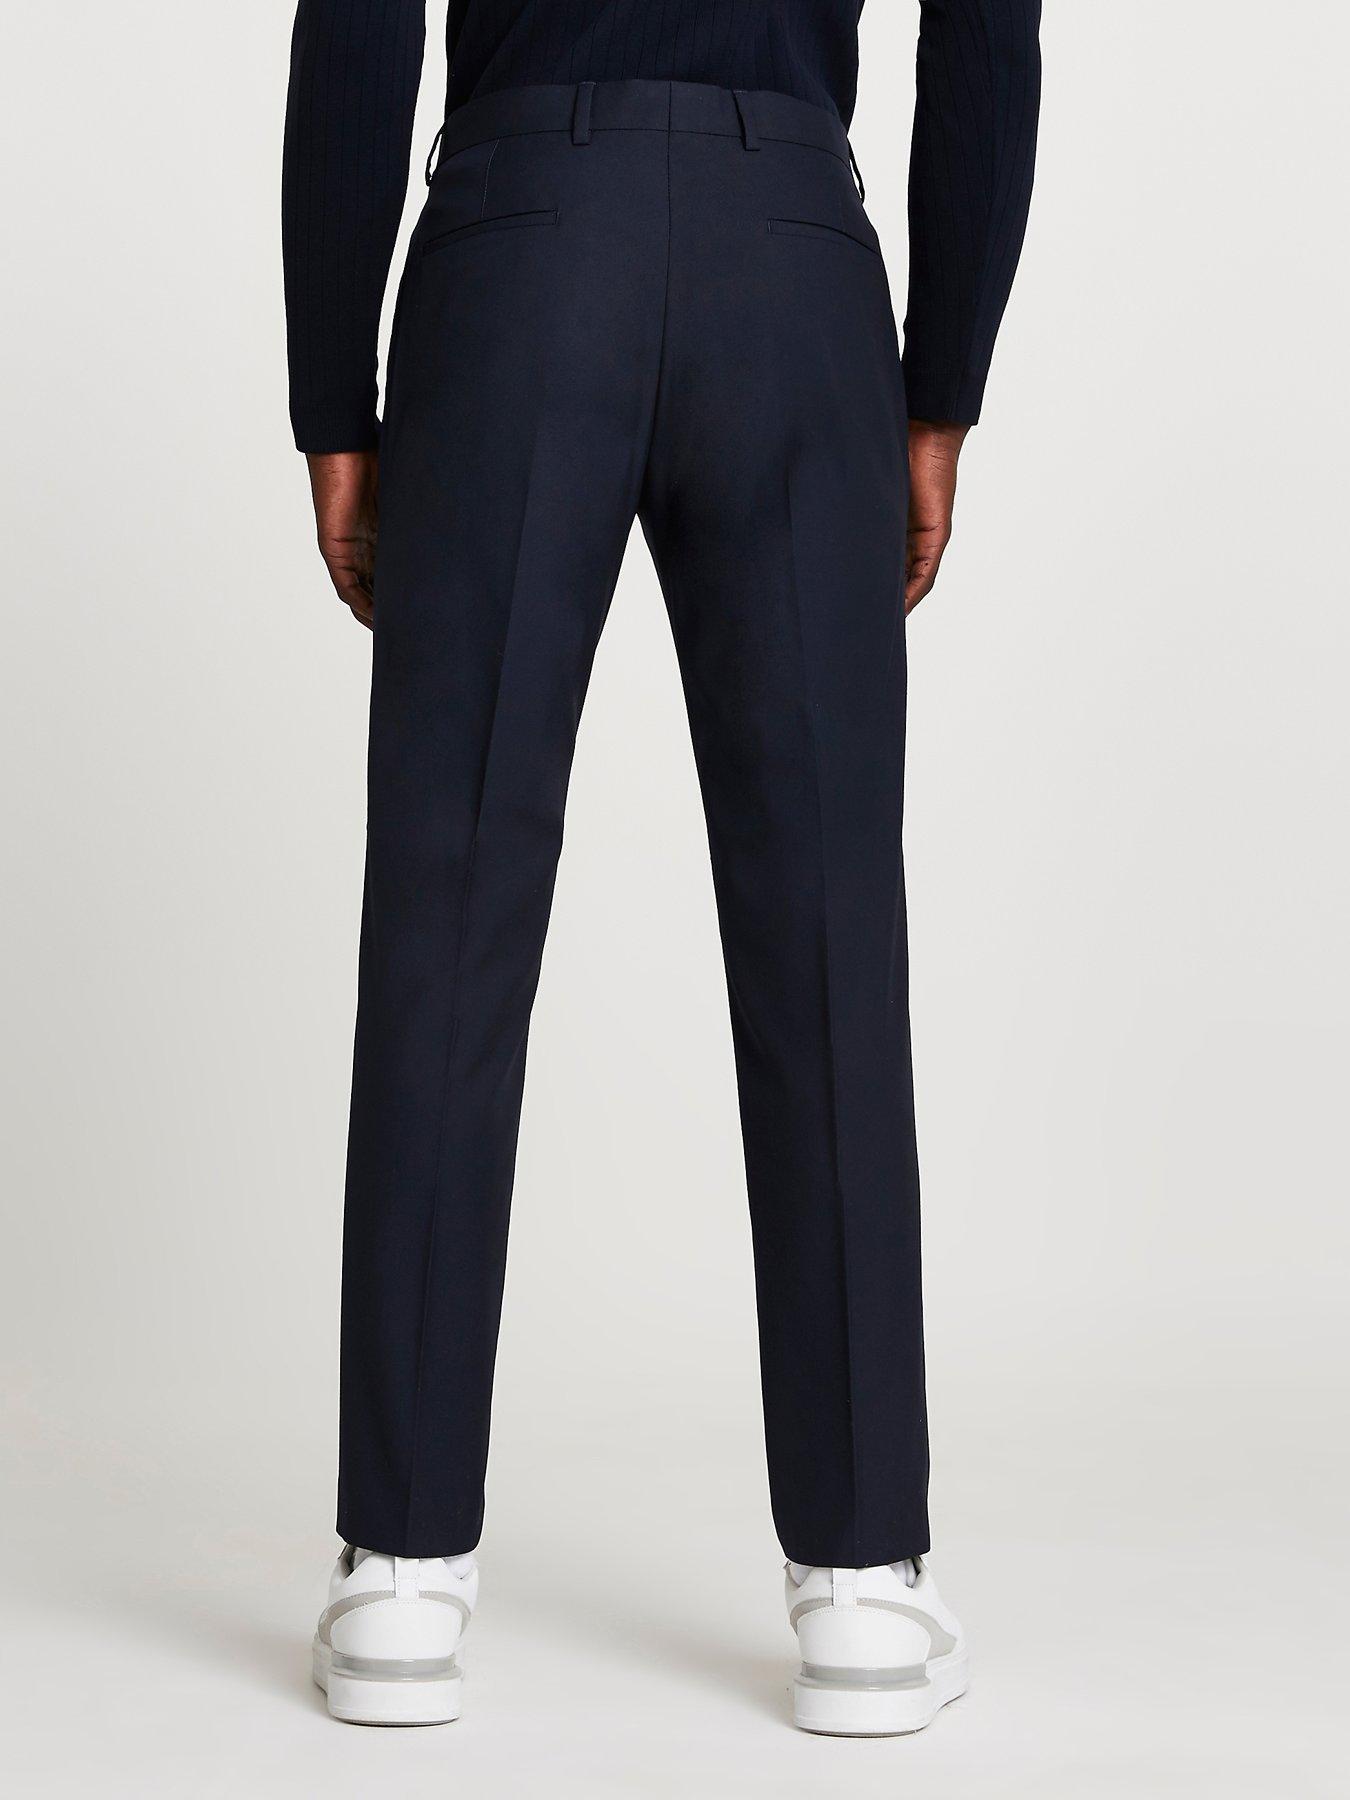 River Island Skinny Fit Twill Suit Trousers - Navy | very.co.uk